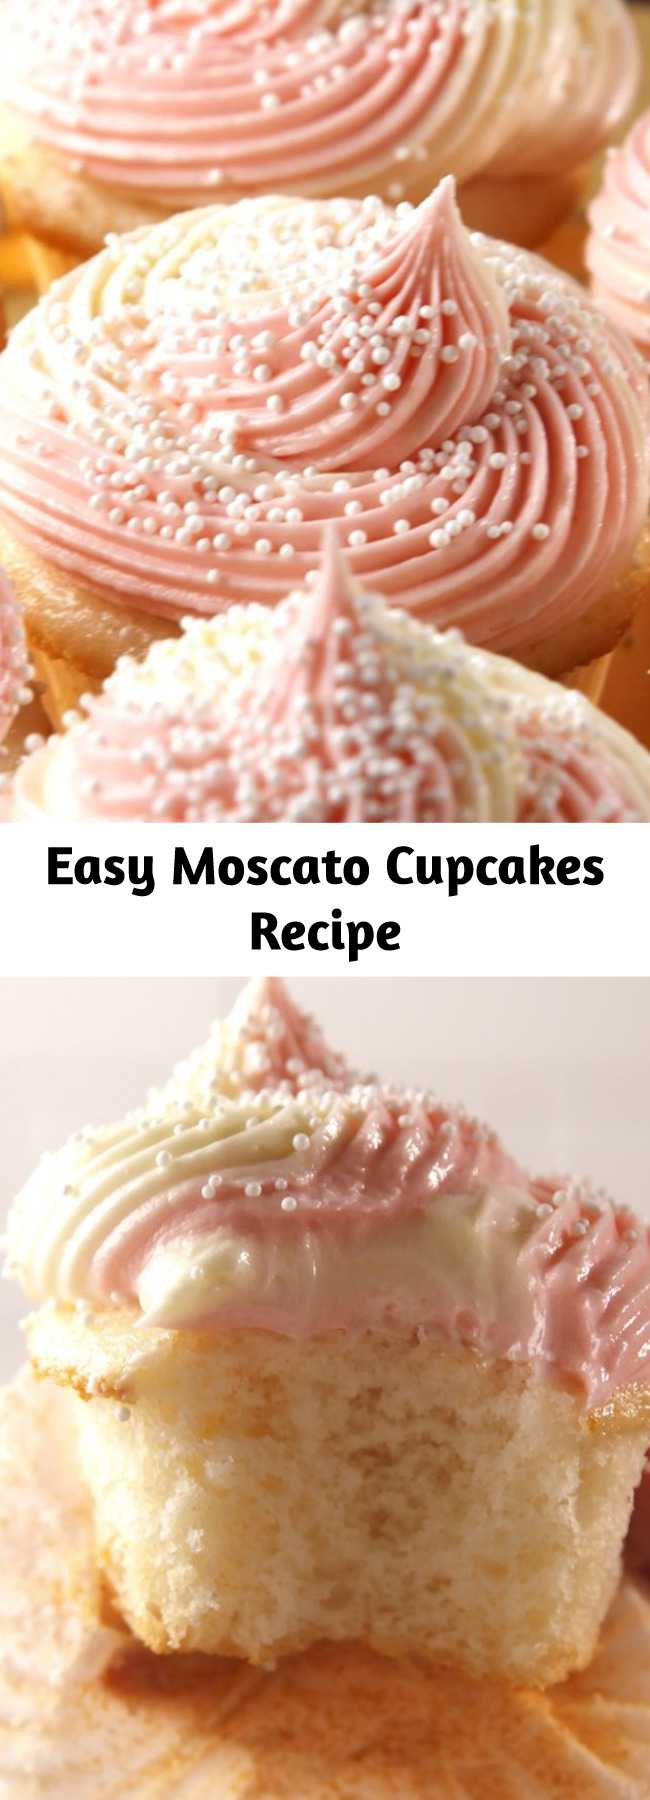 Easy Moscato Cupcakes Recipe - Screw shots — throw a few of these Moscato Cupcakes back this weekend. Cheers!